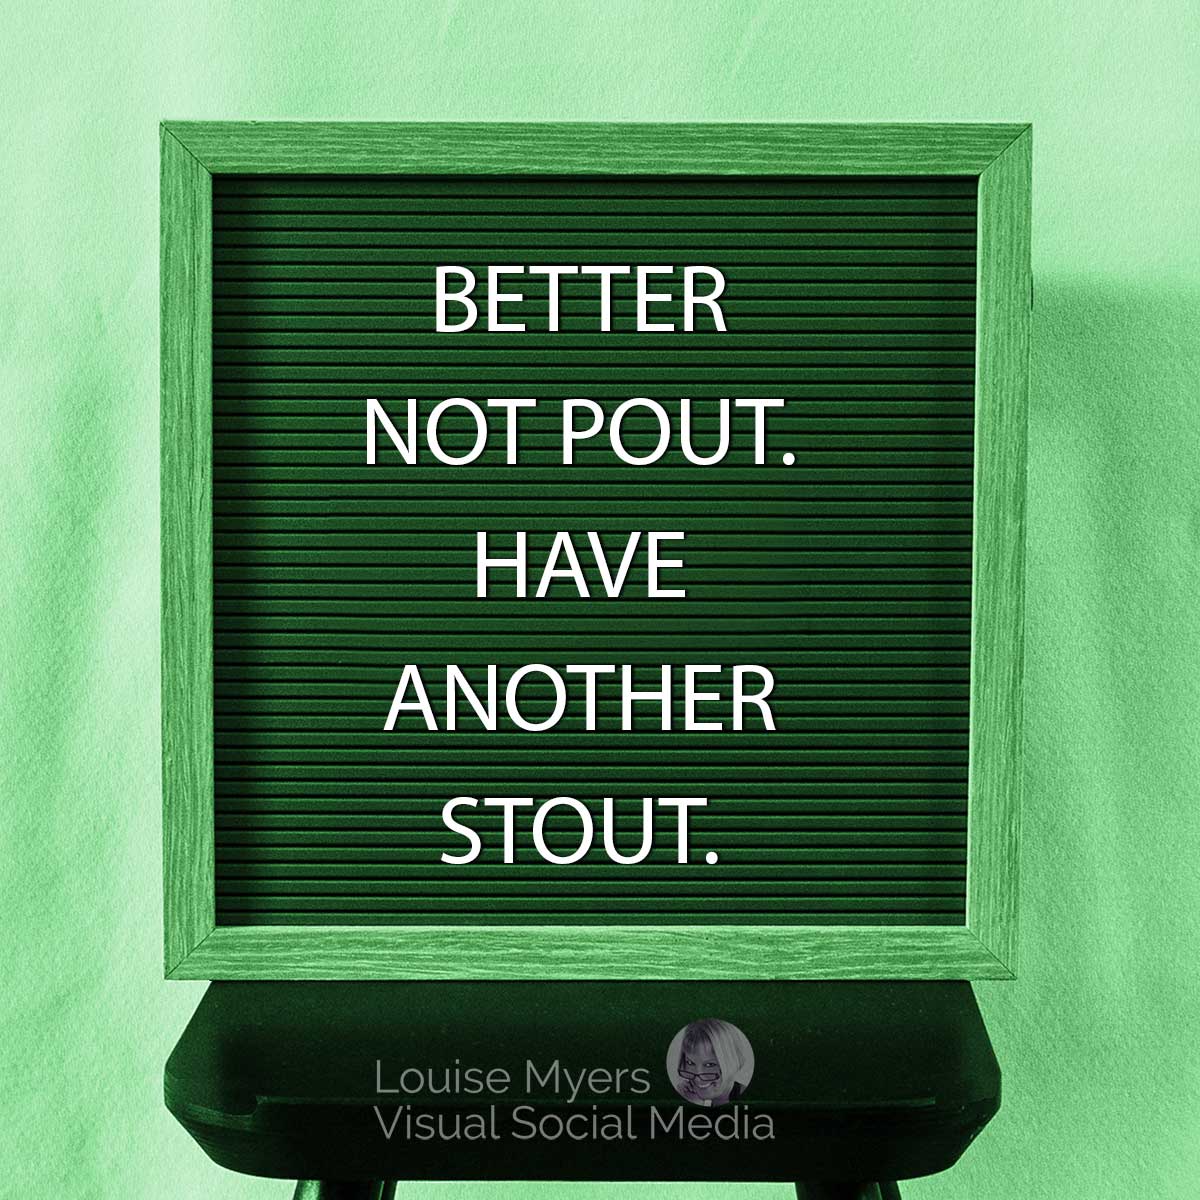 green letter board says better not pout, have another stout.